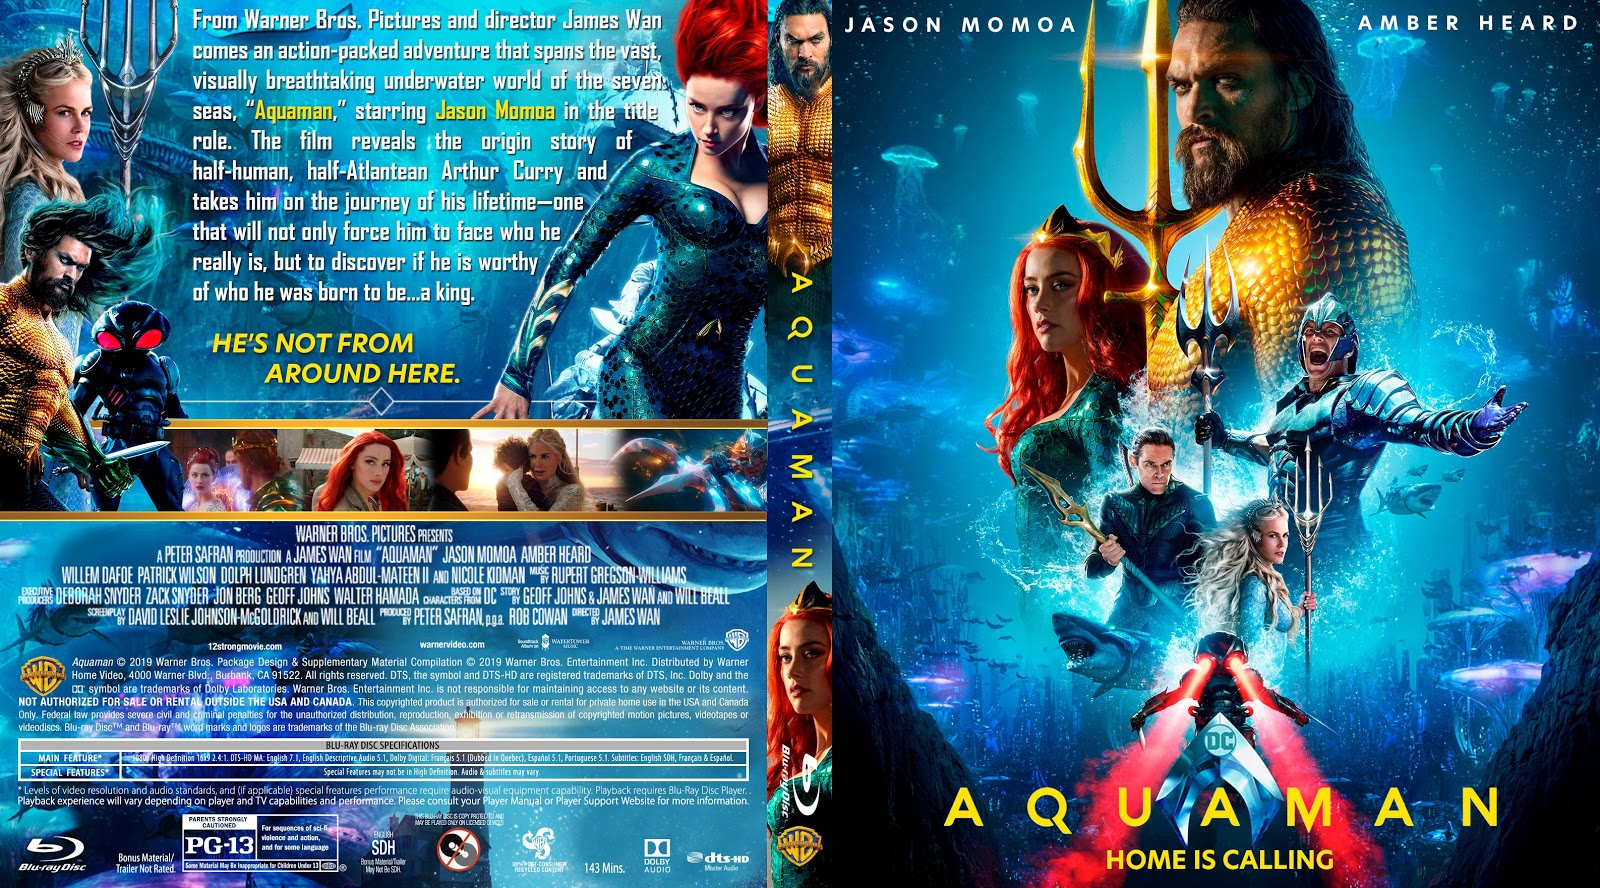 Aquaman Bluray Cover Cover Addict Free Dvd Bluray Covers And Movie Posters